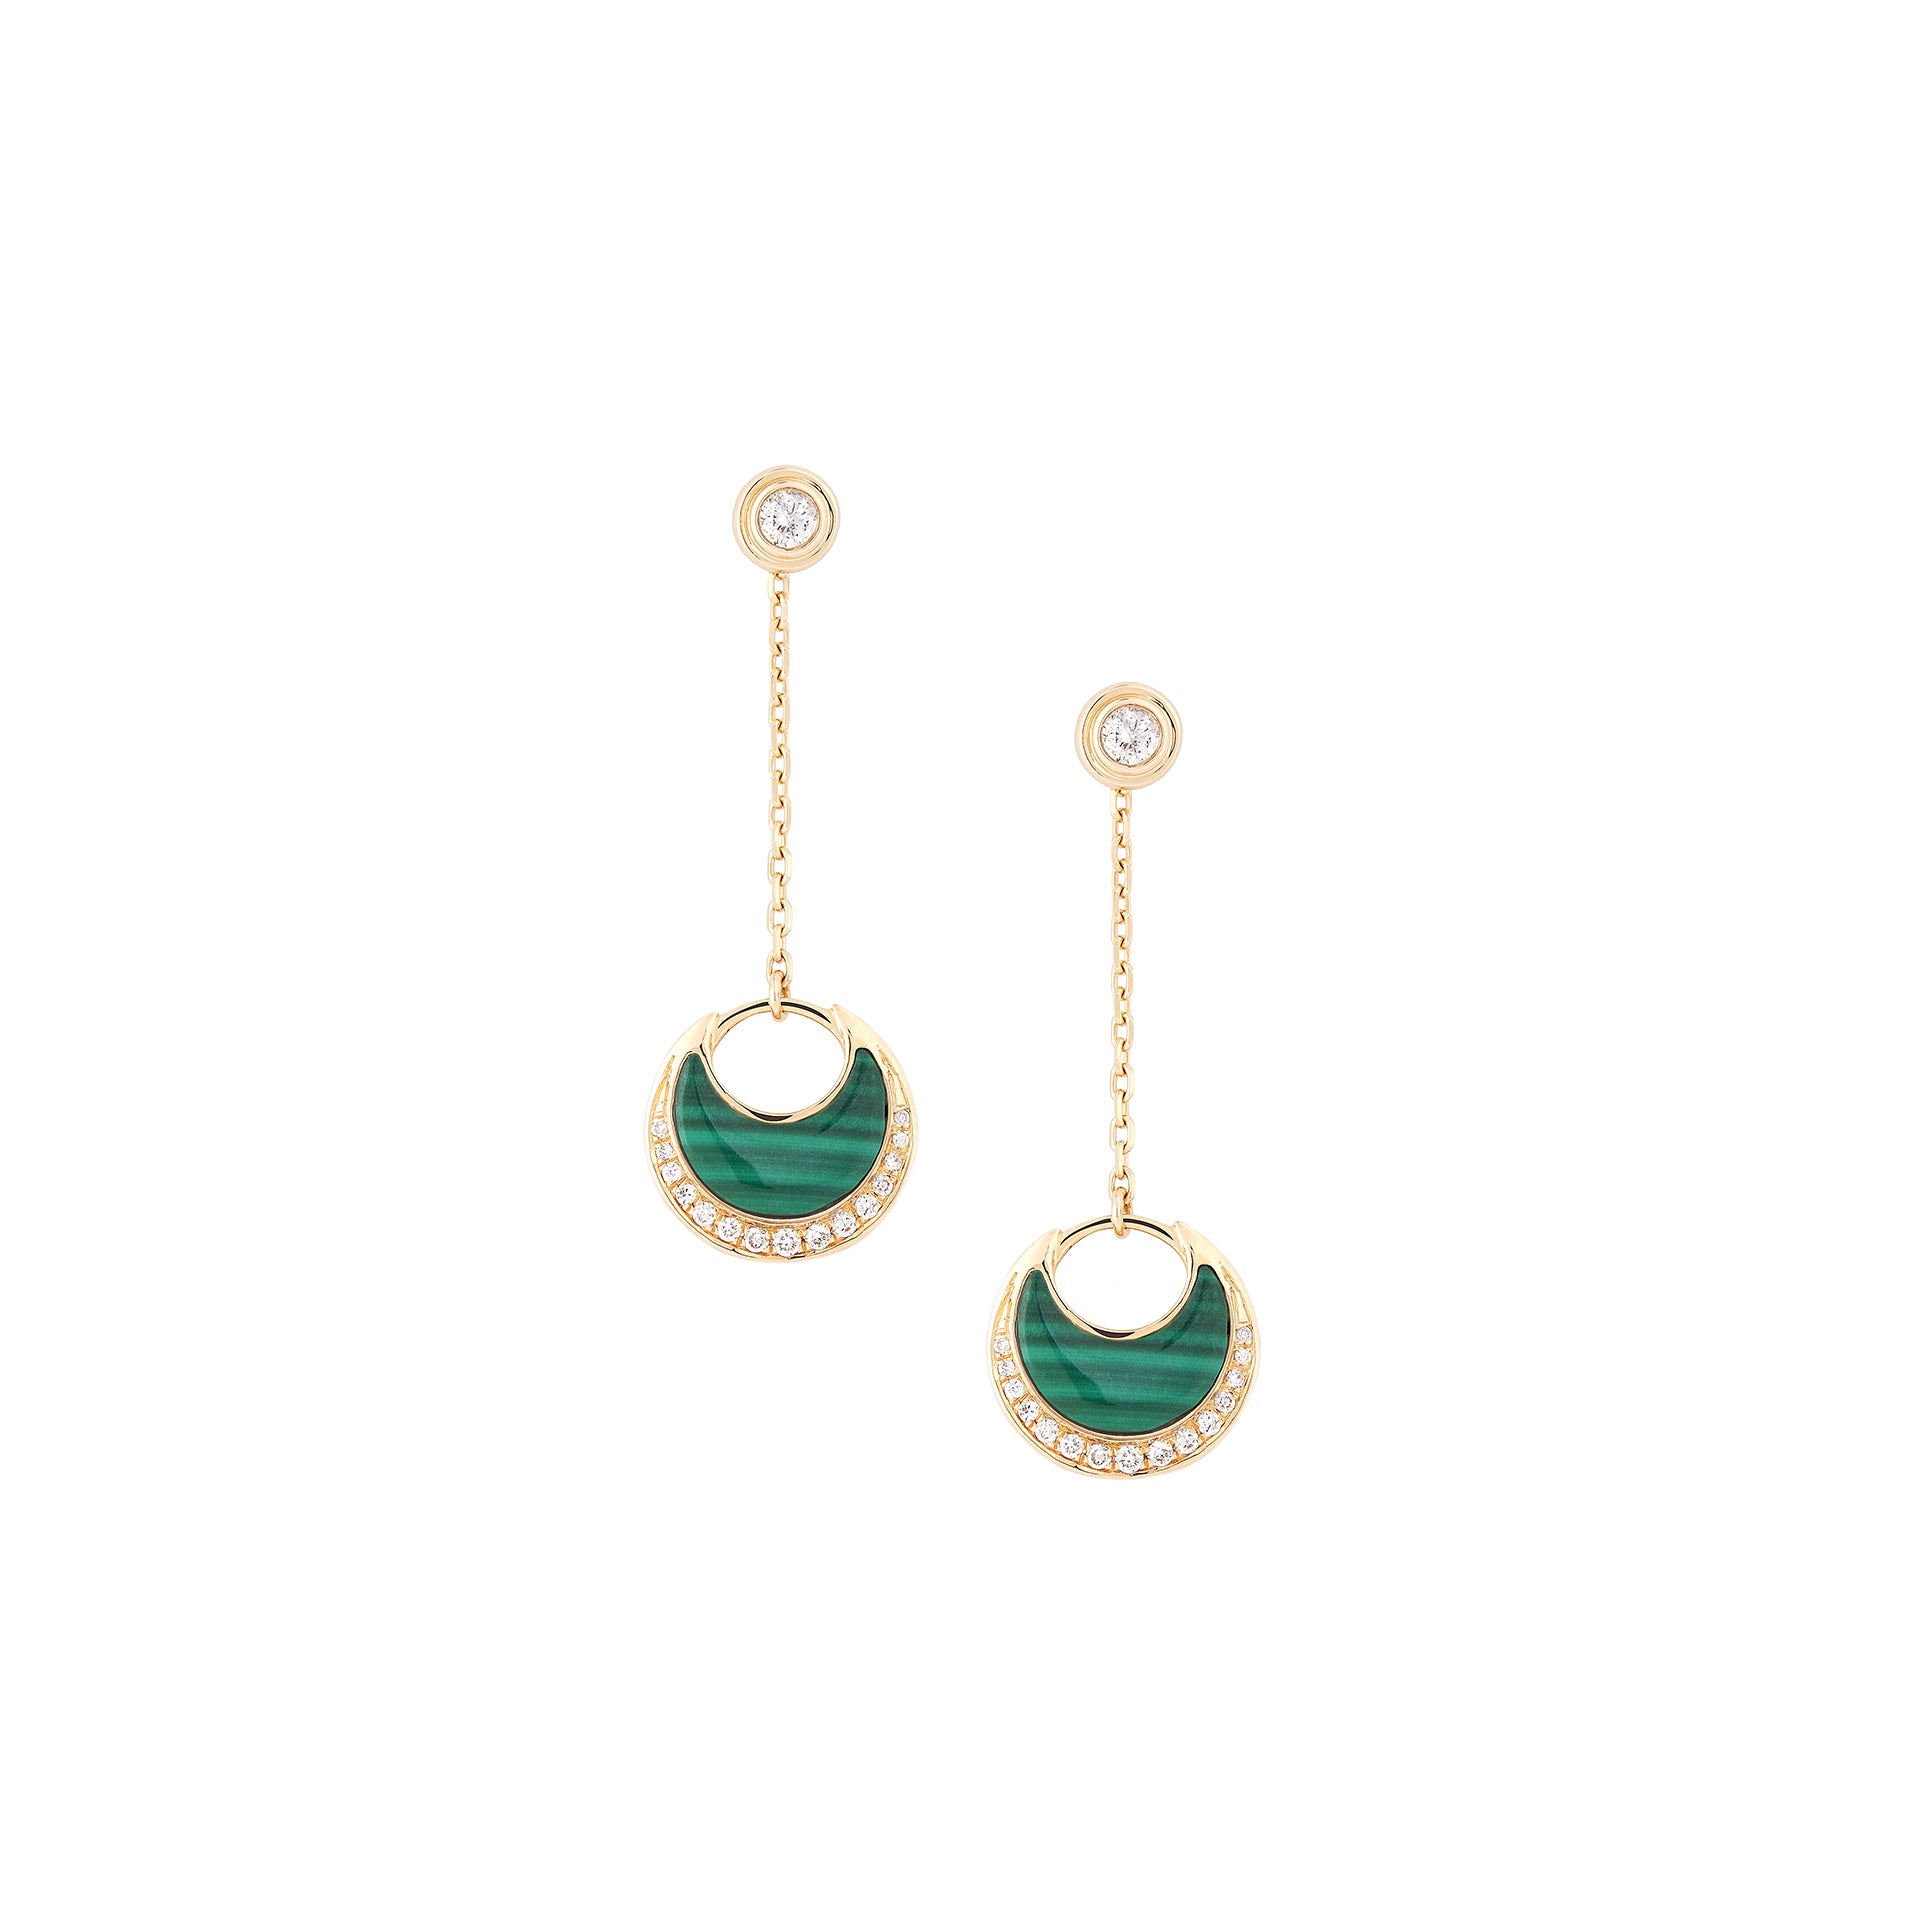 Al Hilal earrings in yellow gold with malachite stone and diamonds